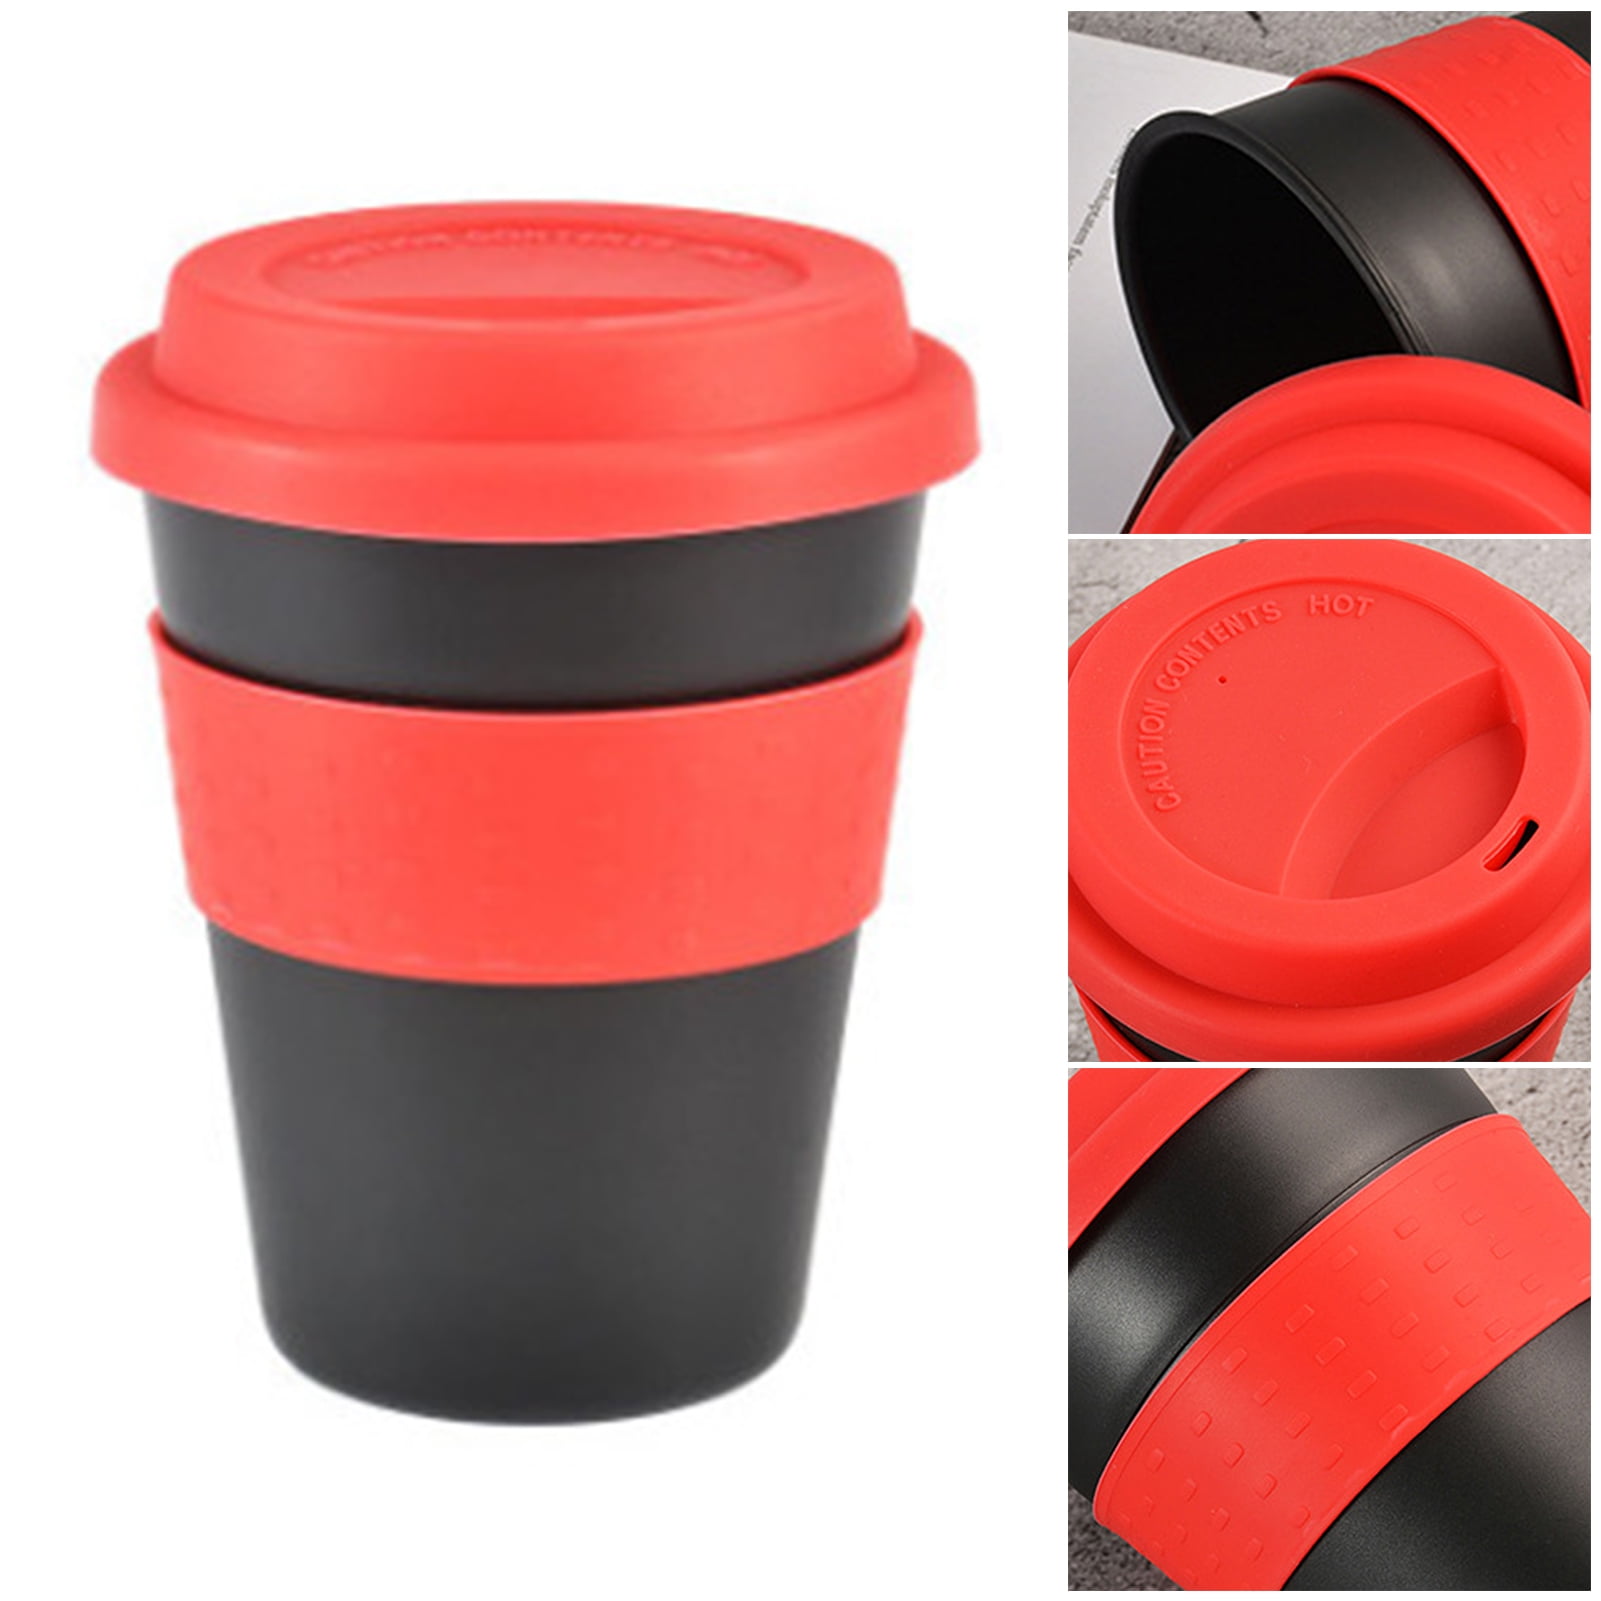 Cheers US Double-Walled Coffee Cup, Reusable Coffee Cup with Resealable Lid, Food-grade Silicone Seal and Sleeve, Insulated Coffee Tumbler, Leakproof